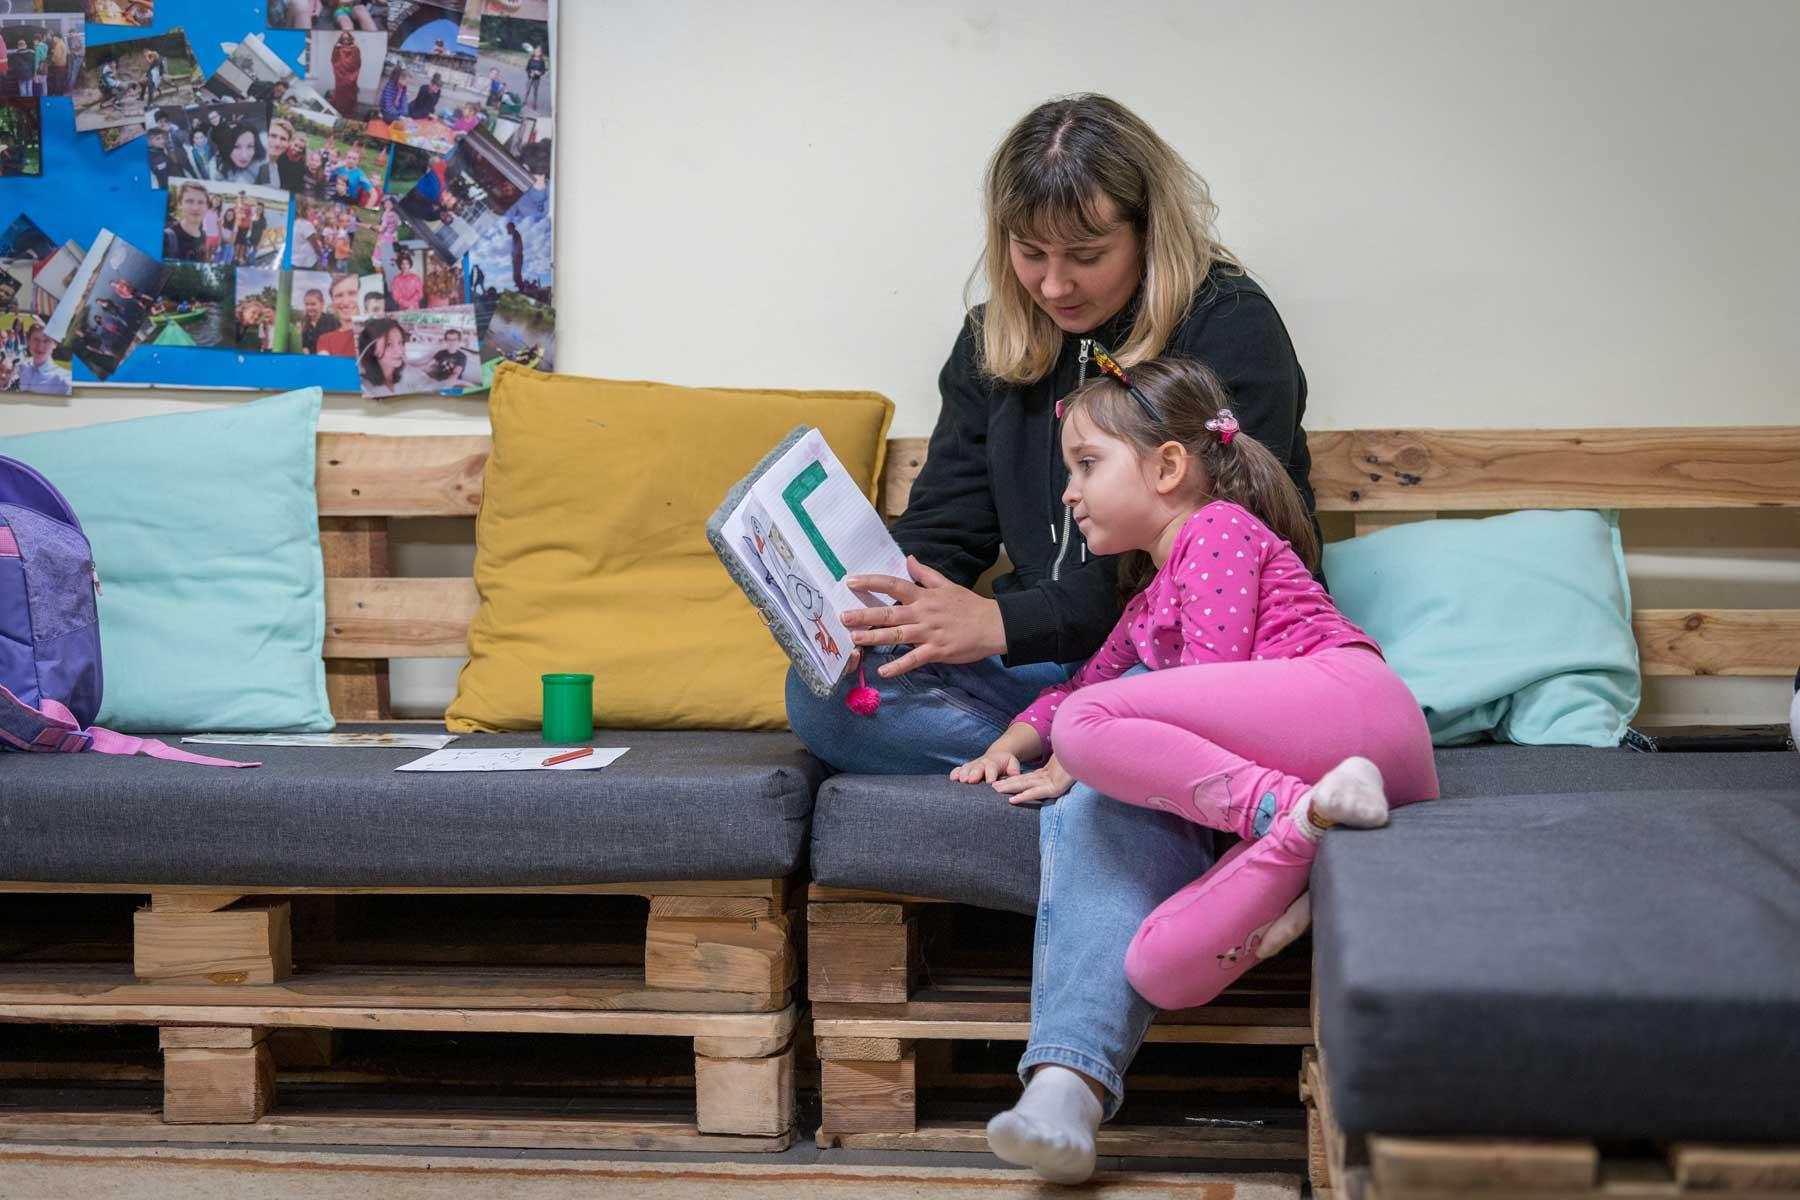 Katiia Kharytoniuk (37) and her daughter Sofija (5) practice the alphabet together. Katiia arrived as a refugee in Poland from Uman, Ukraine, together with her two daughters. After three months staying in the home of a Polish family, she now lives with her daughters in a building at the Evangelical Church of the Augsburg Confession in Poland parish in Bytom. The father of the family remains in Ukraine, as men aged 18-60 are not allowed to leave the country. Photo: LWF/Albin Hillert